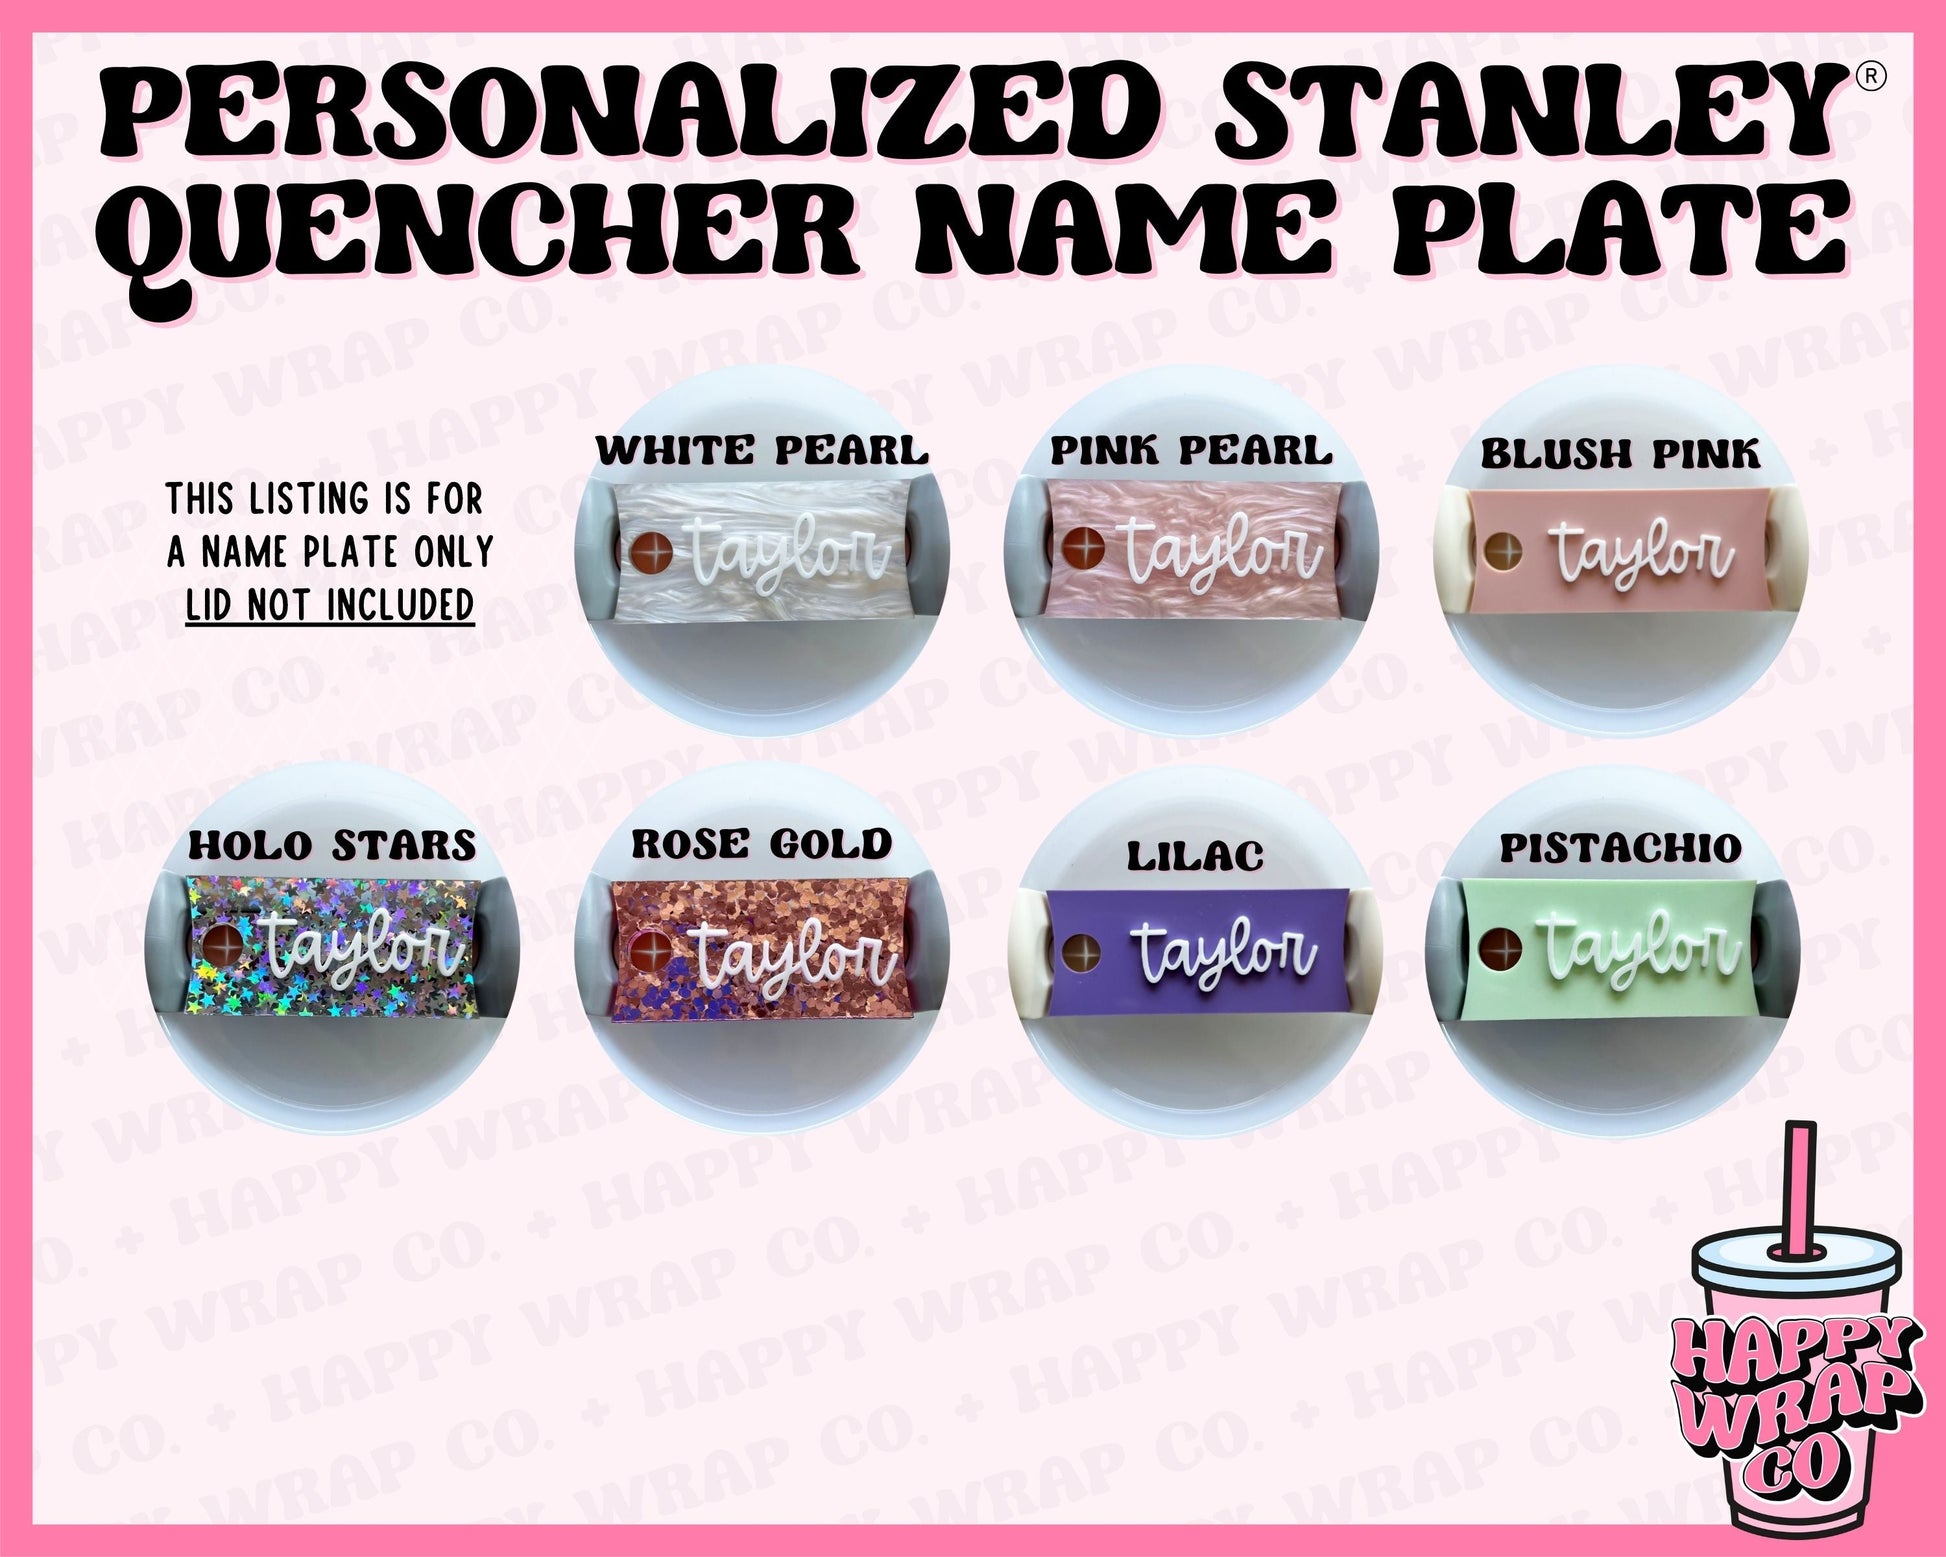 Personalized Stanley Name Plate – White Peach Design House